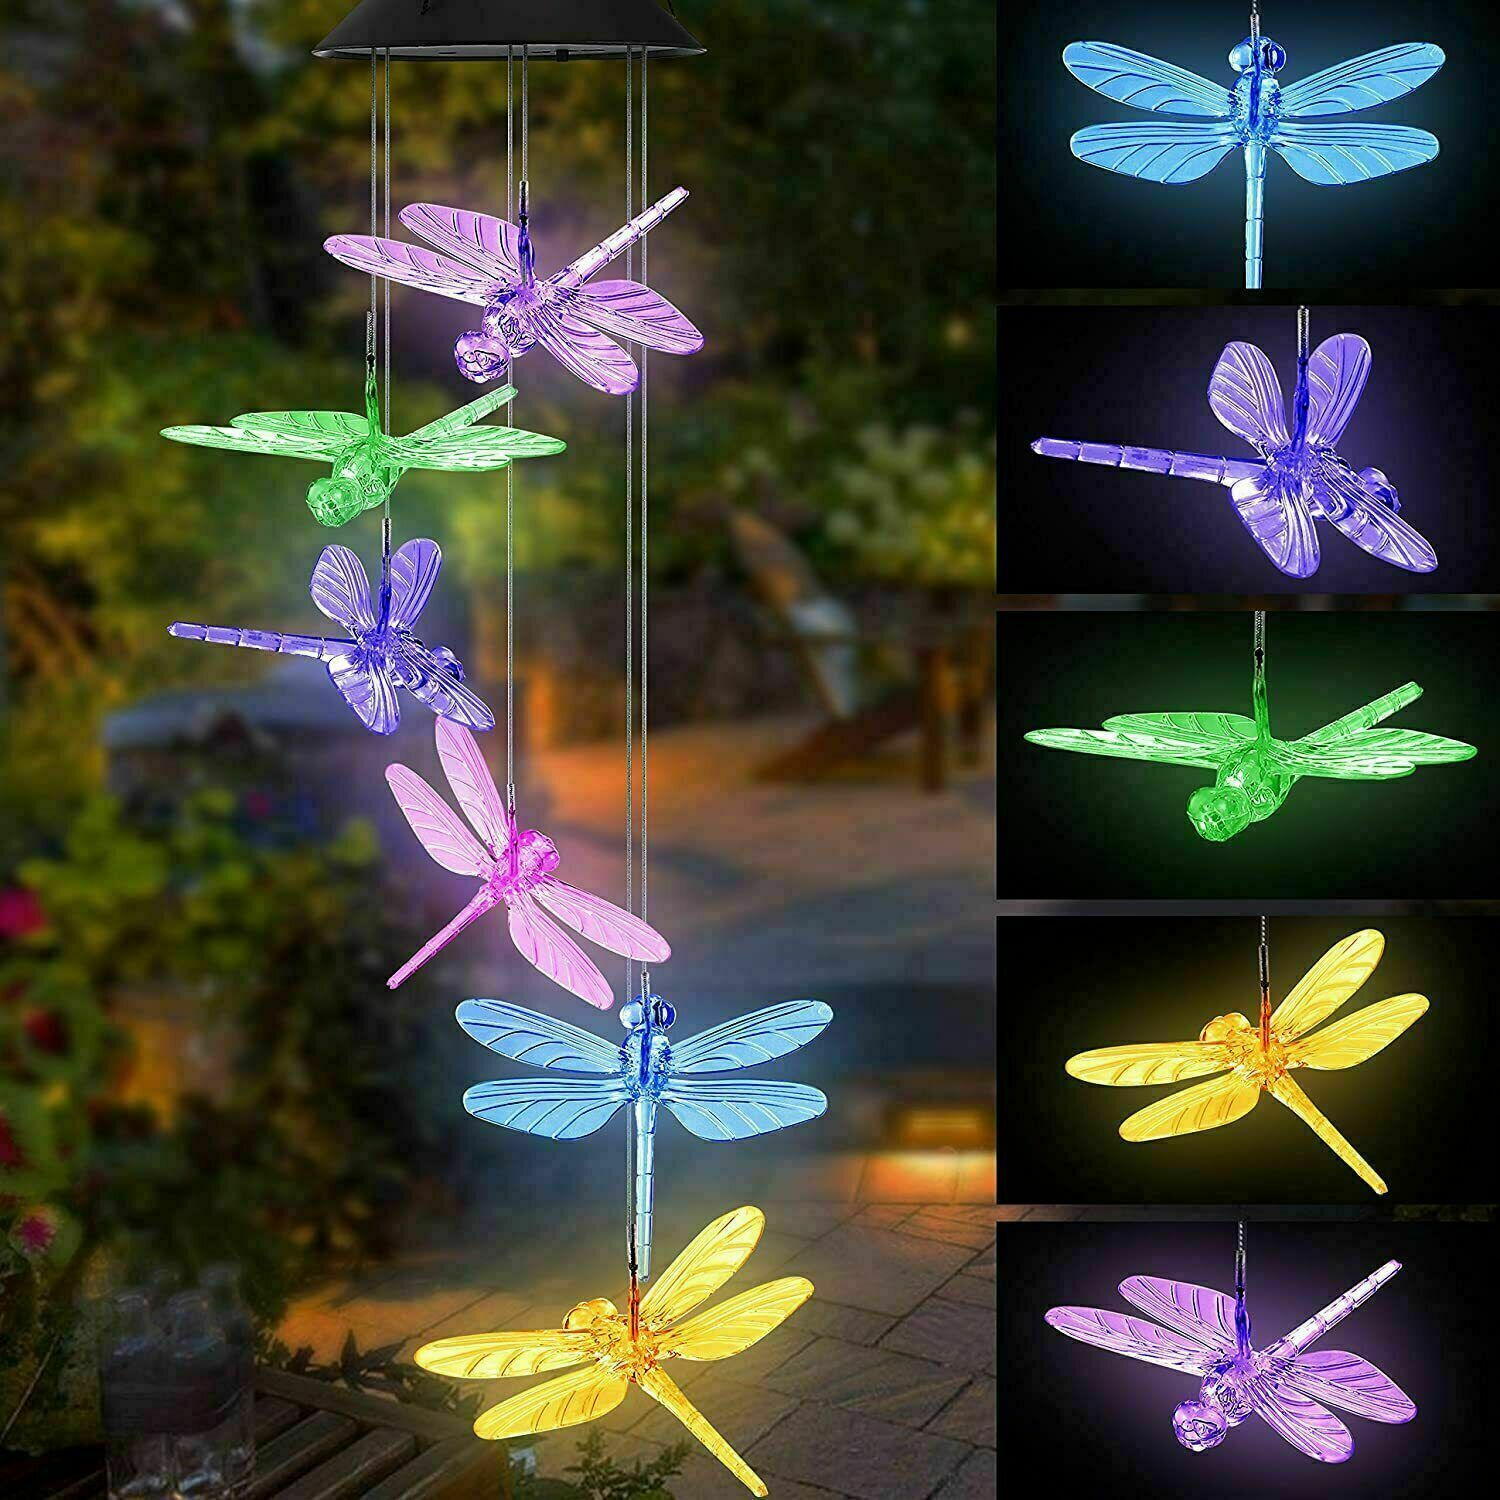 Solar Wind Chimes Light LED Garden Color Changing Hanging Butterfly Heart Star